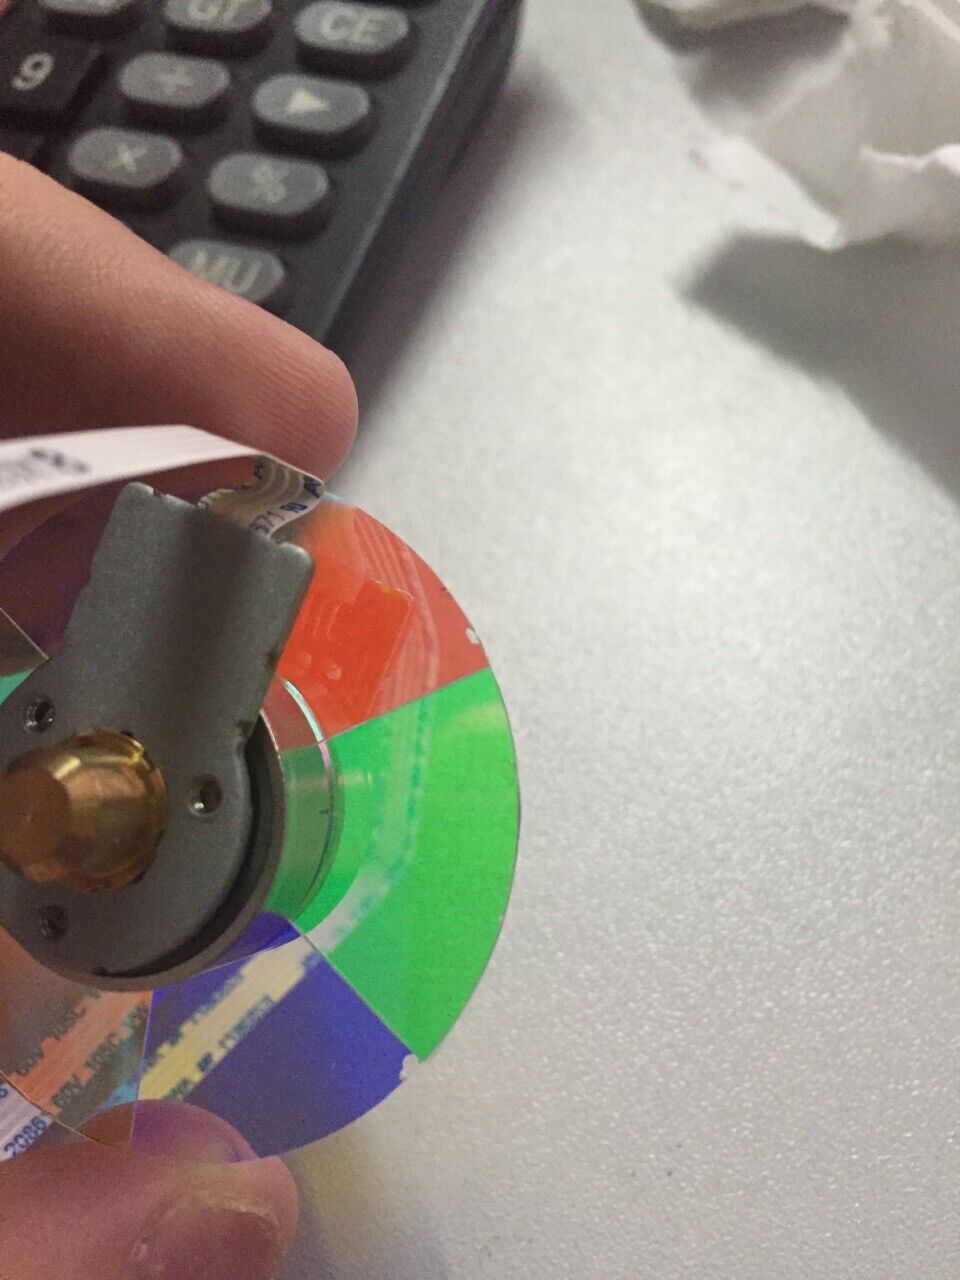 New Color Wheel FOR BENQ HT2050 DLP Projector